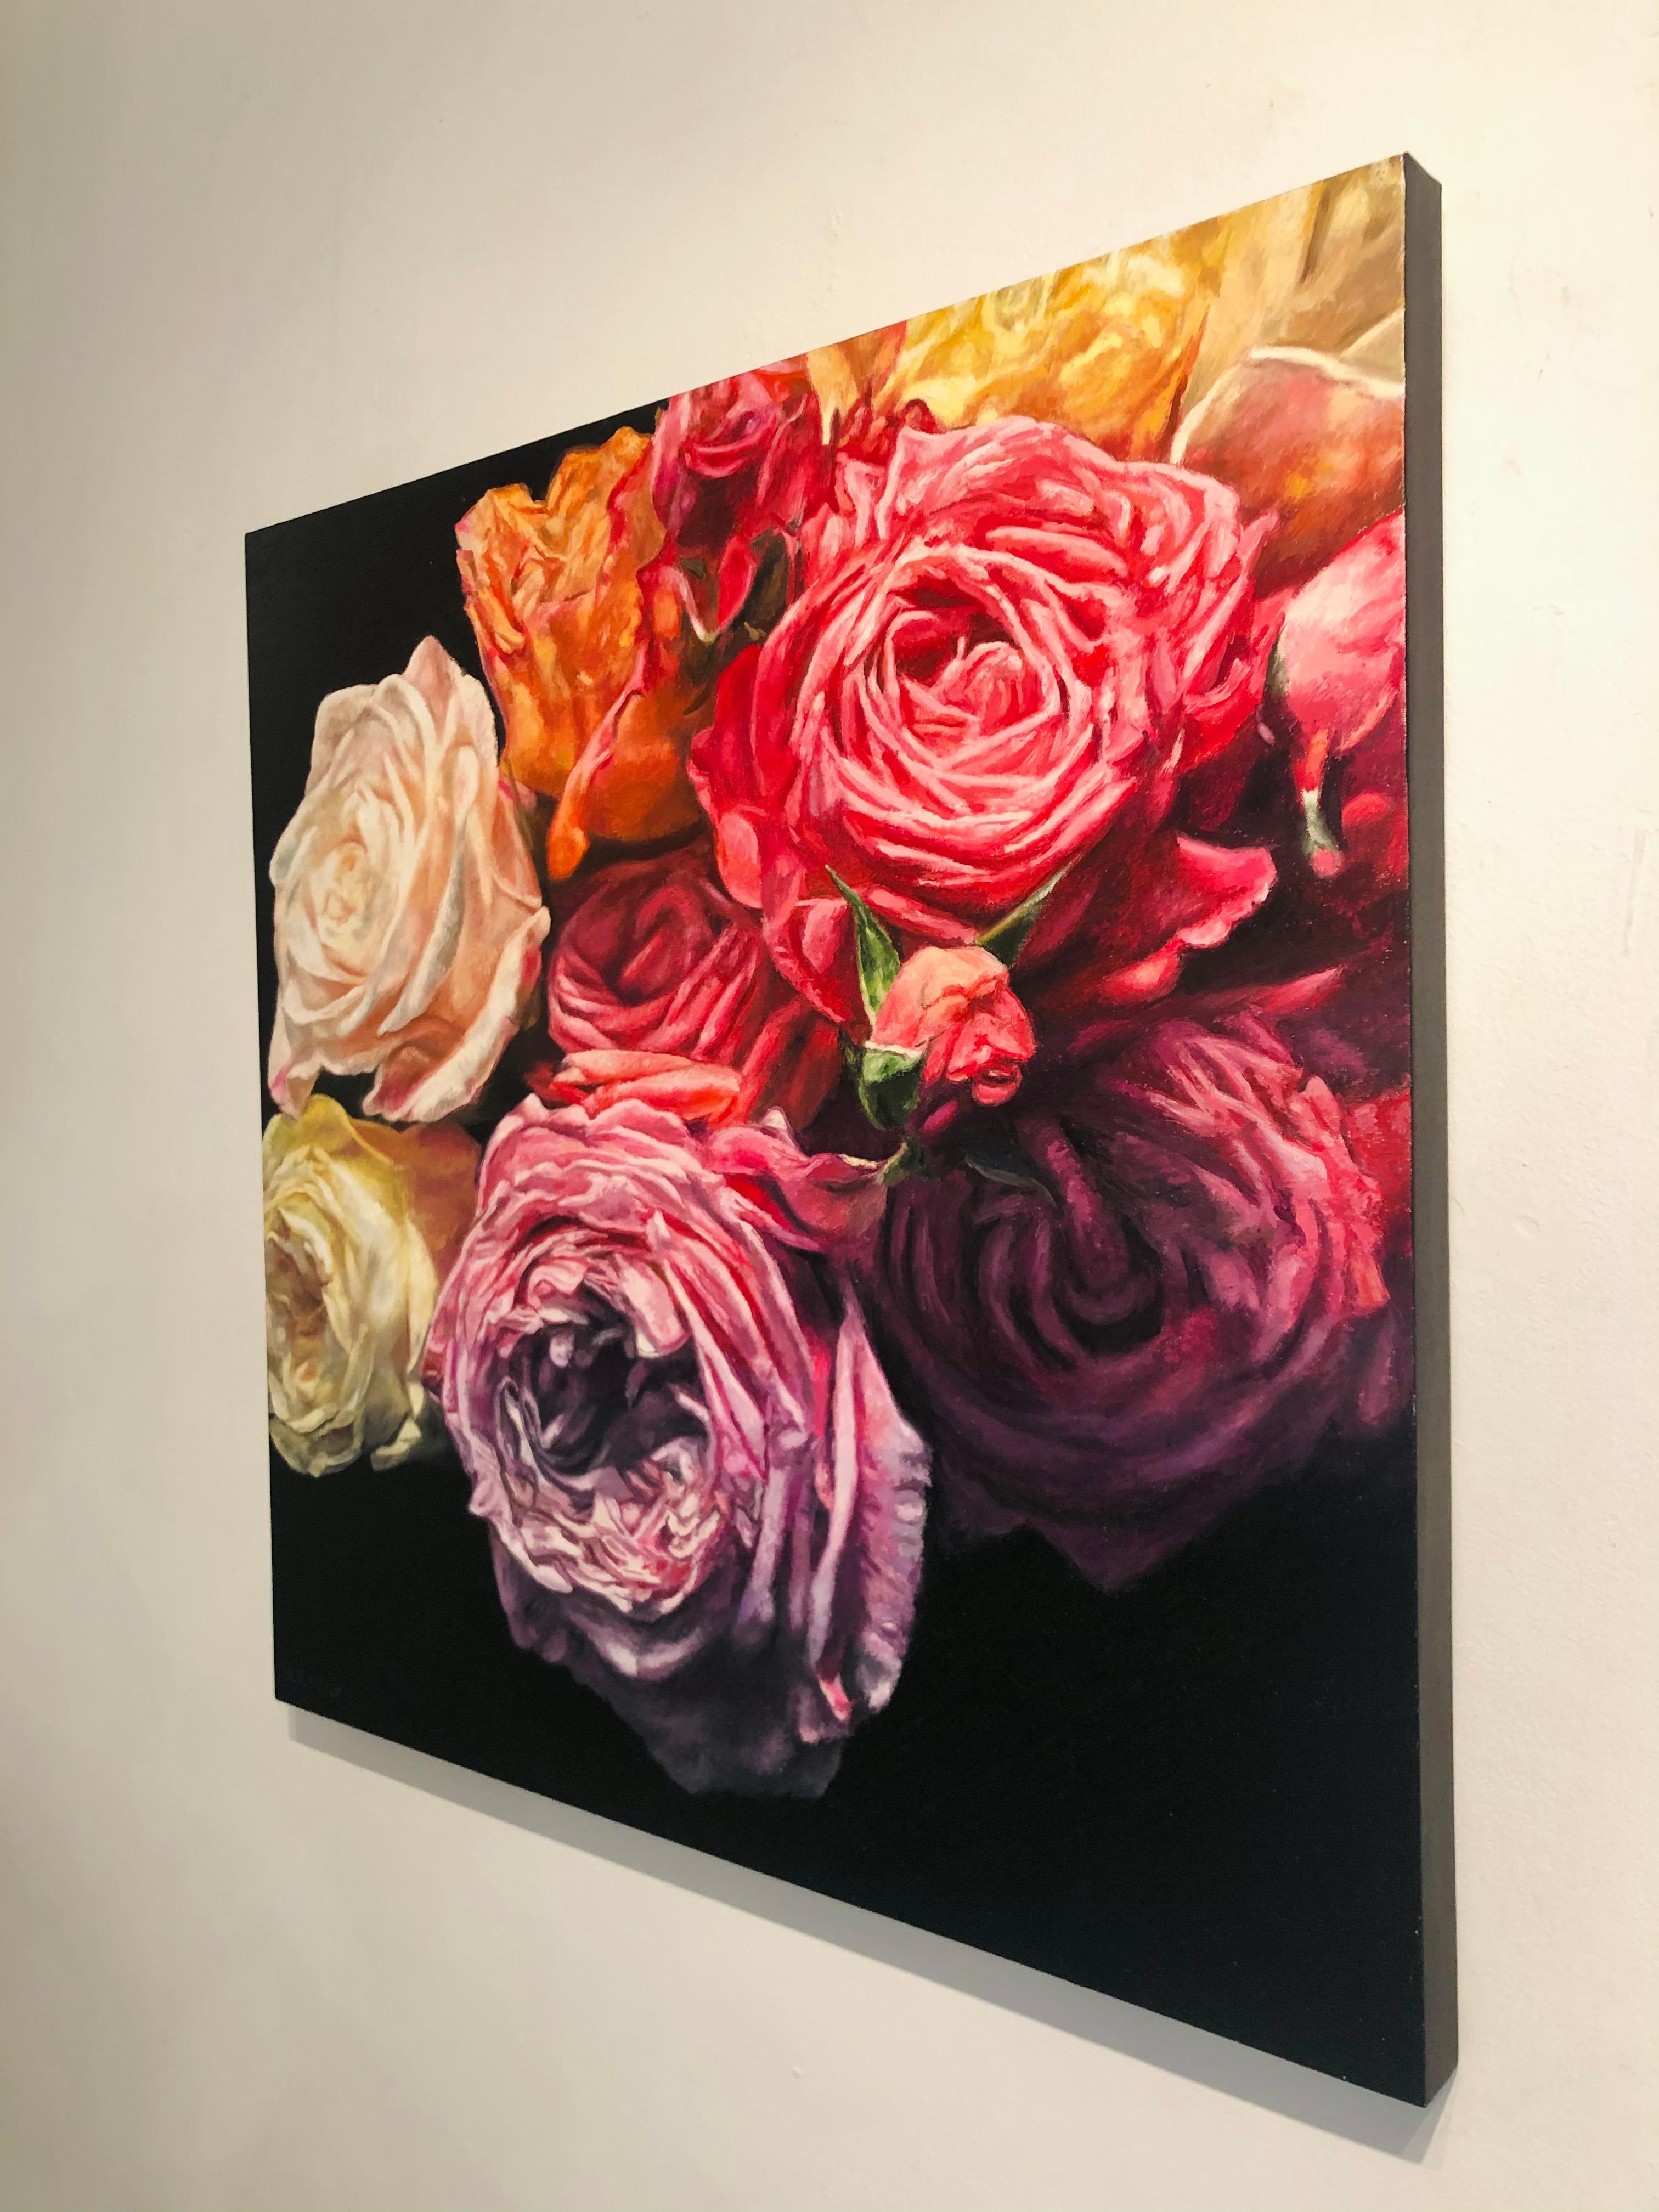 Garden Roses II - original floral still oil painting contemporary hyperrealism - Painting by Robert Lemay